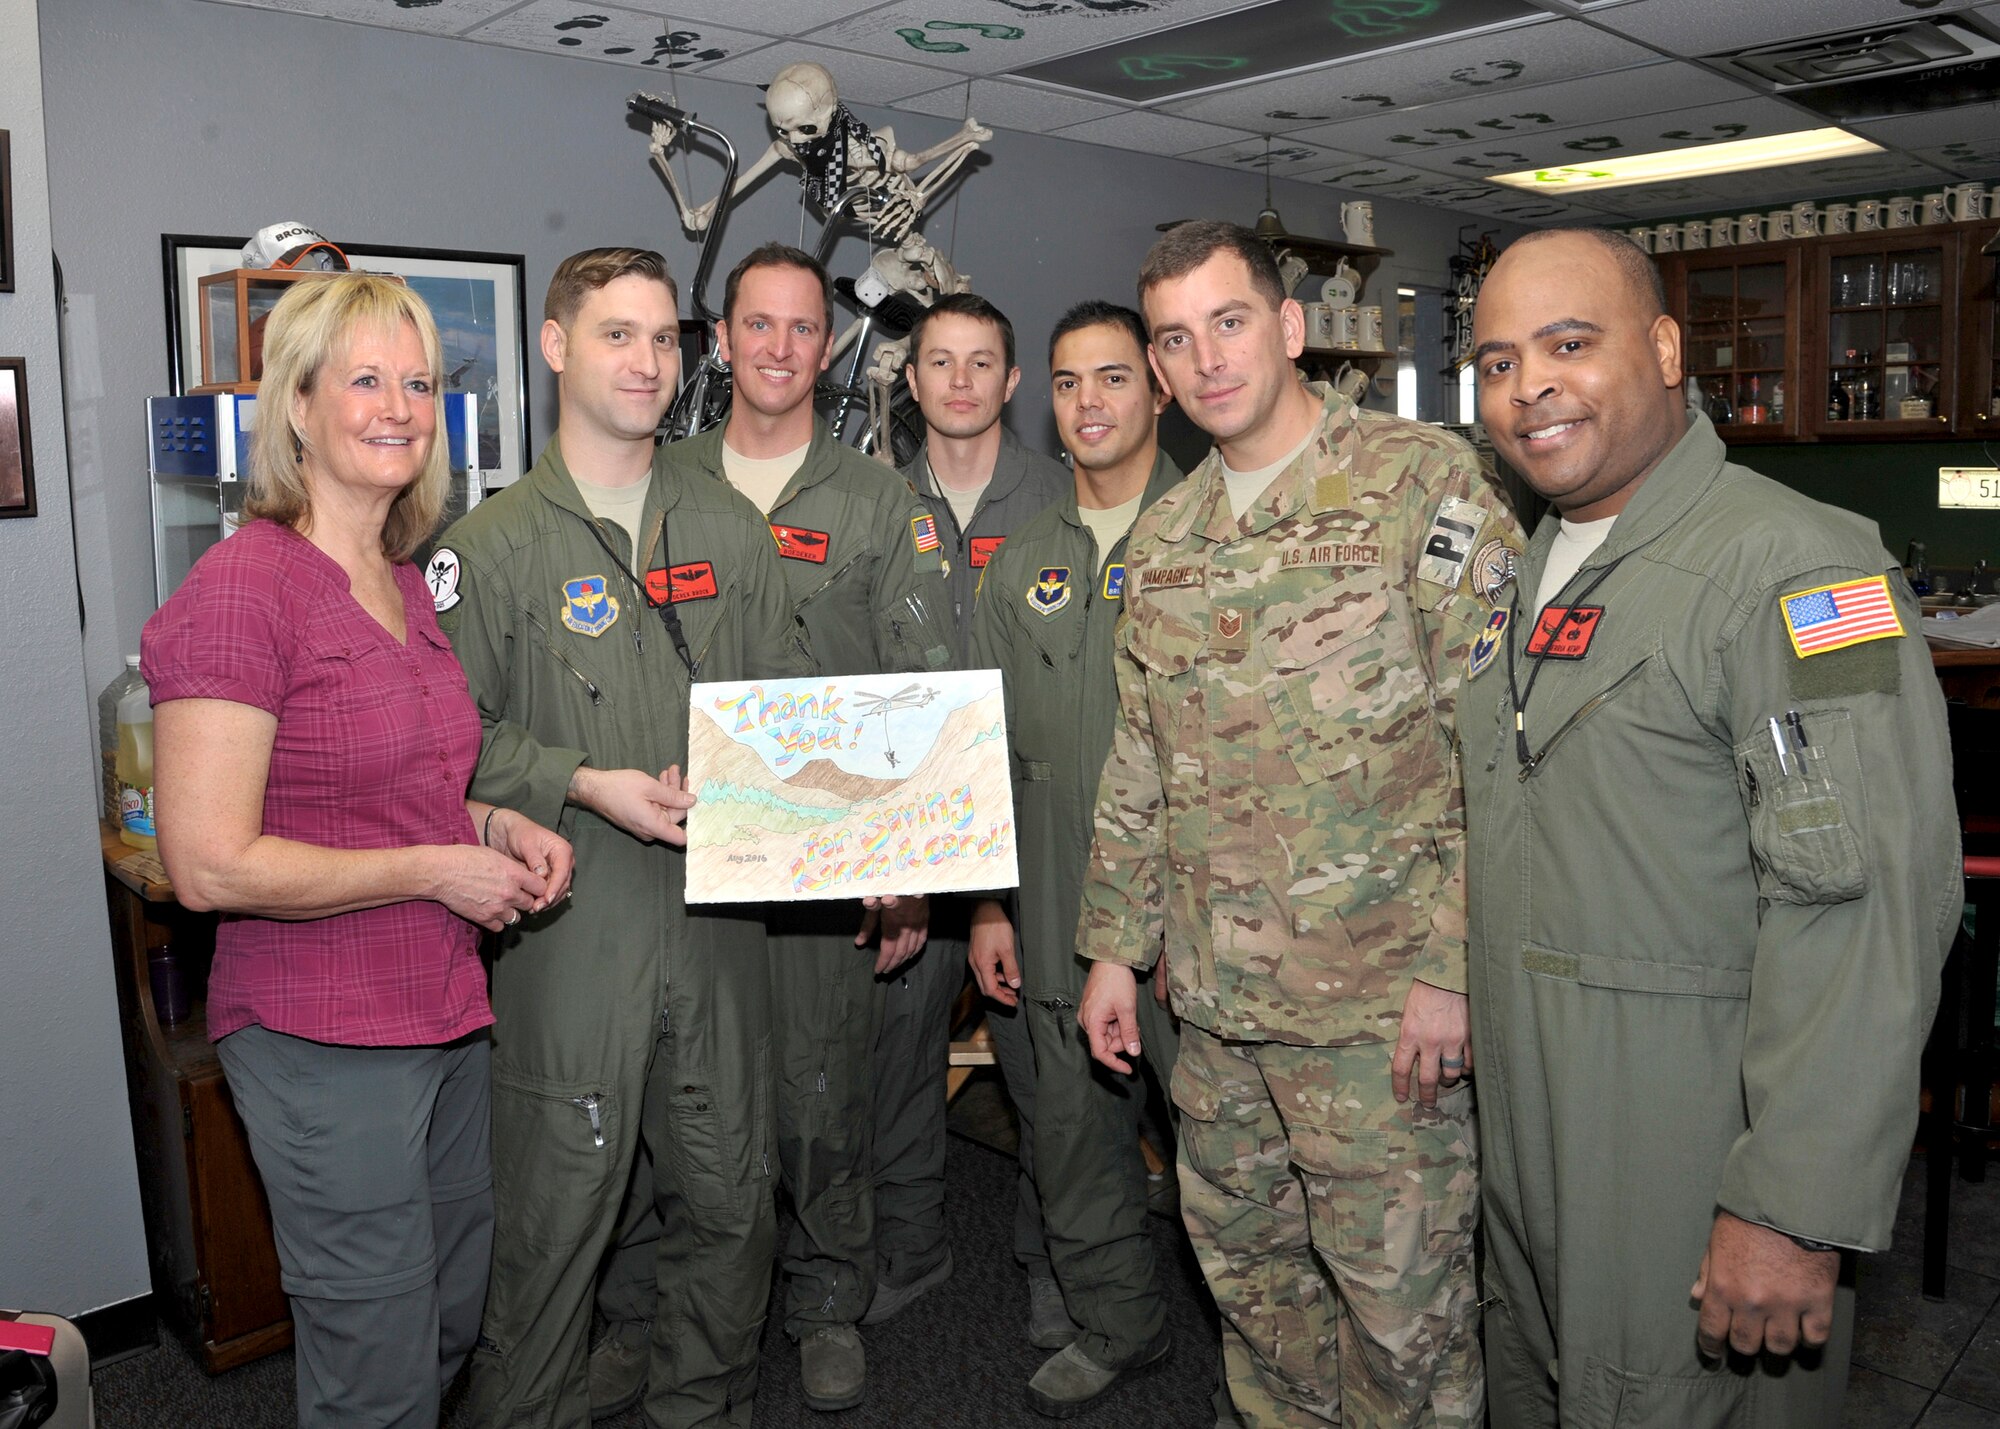 Ronda Ramsier poses with Airmen from the 58th Special Operations Wing and 512th Rescue Squadron with pictures created by neighborhood children thanking them for her rescue. Ramsier became stranded during an August hike near Durango, Colorado. More than 50 Airmen assisted in the 12 hour search-and-rescue mission. 